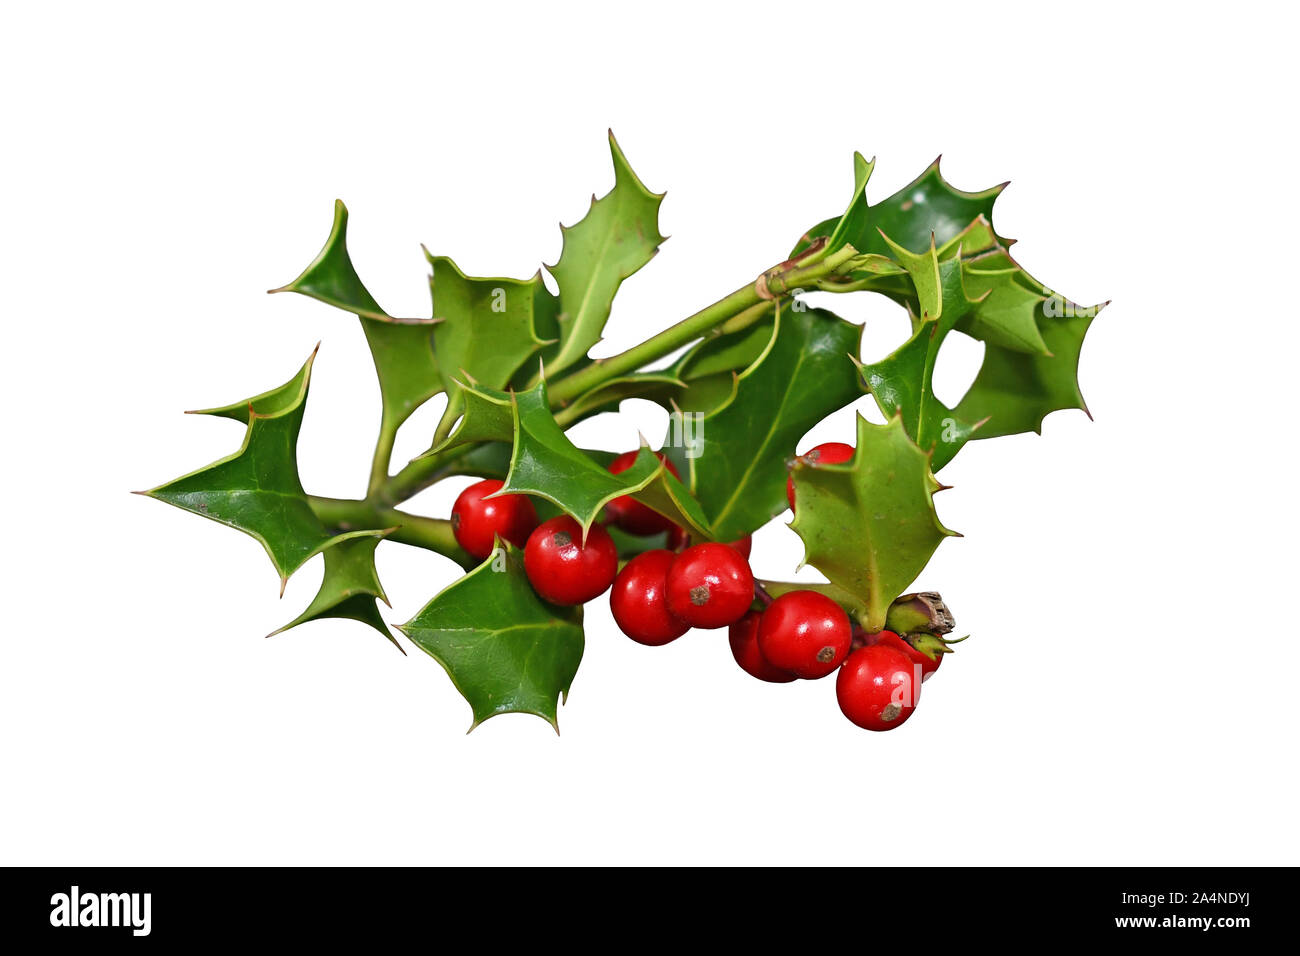 Branch of European holly 'Ilex aquifolium', also called 'Christ's thorn' with green leaves and red berries cut out on white background Stock Photo